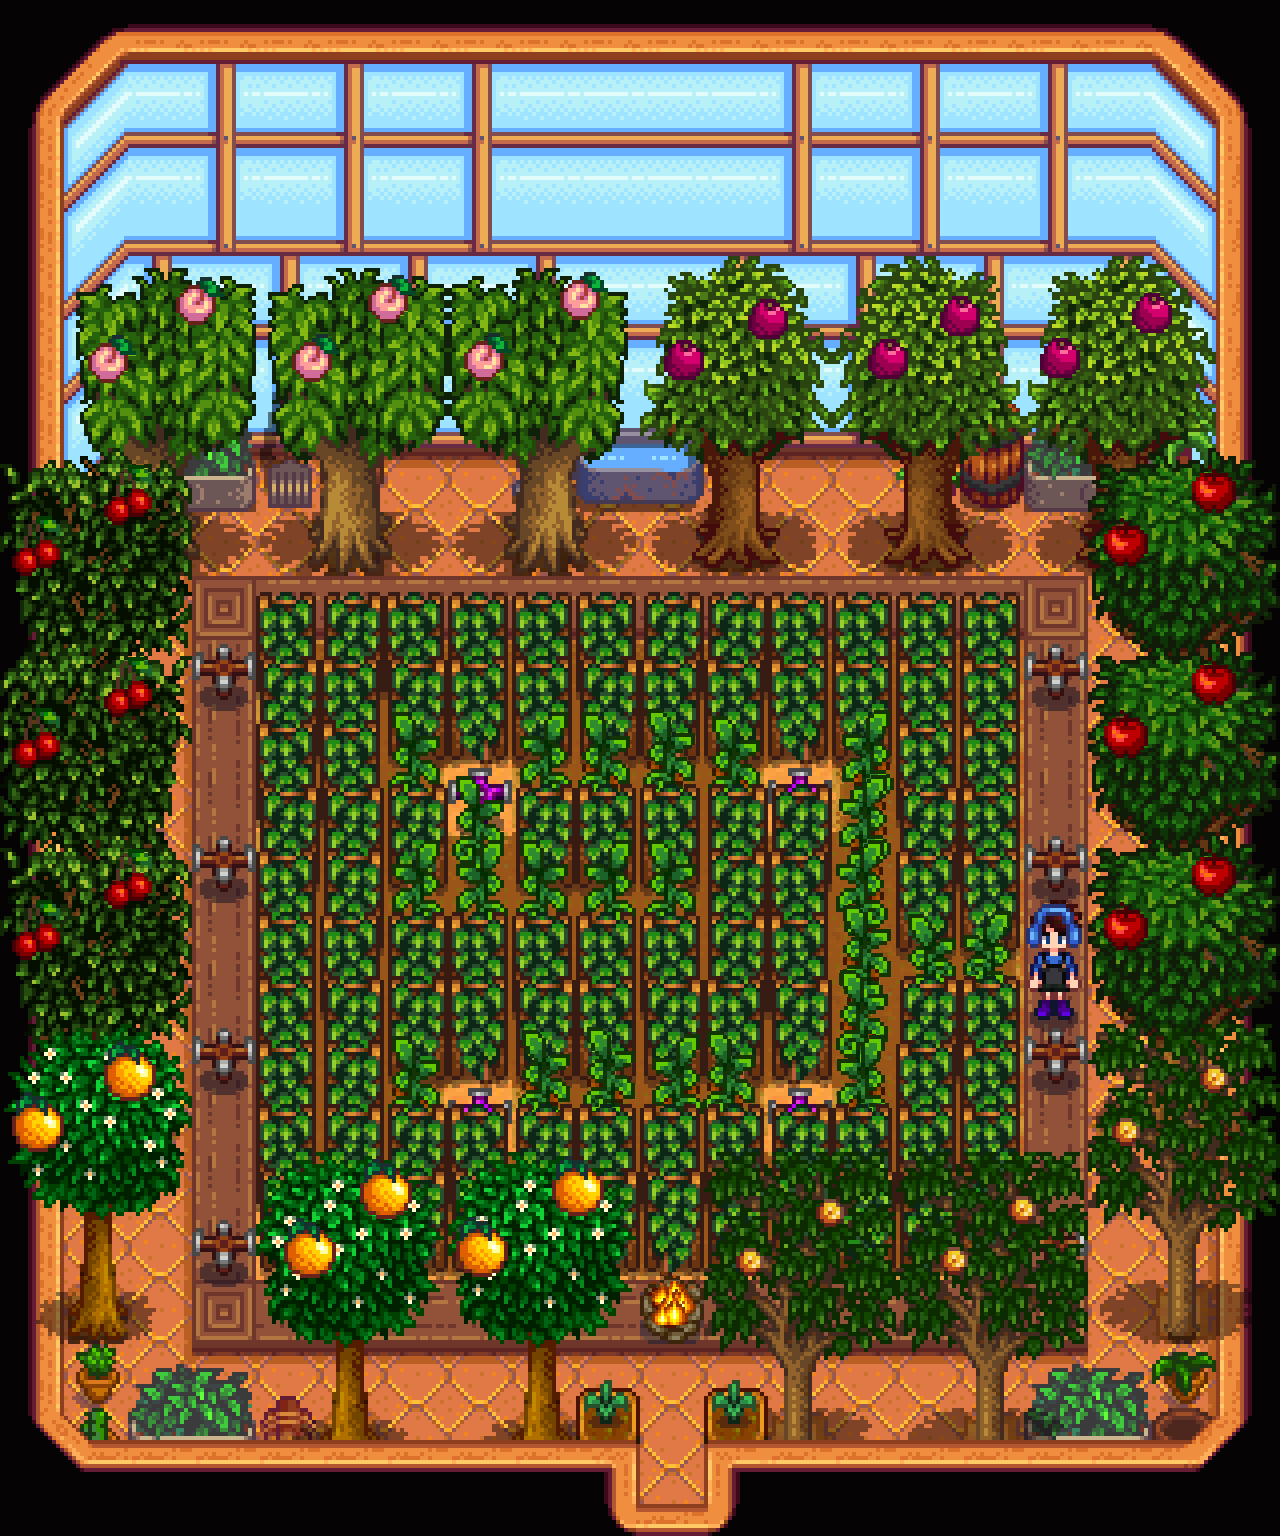 Hops in Greenhouse